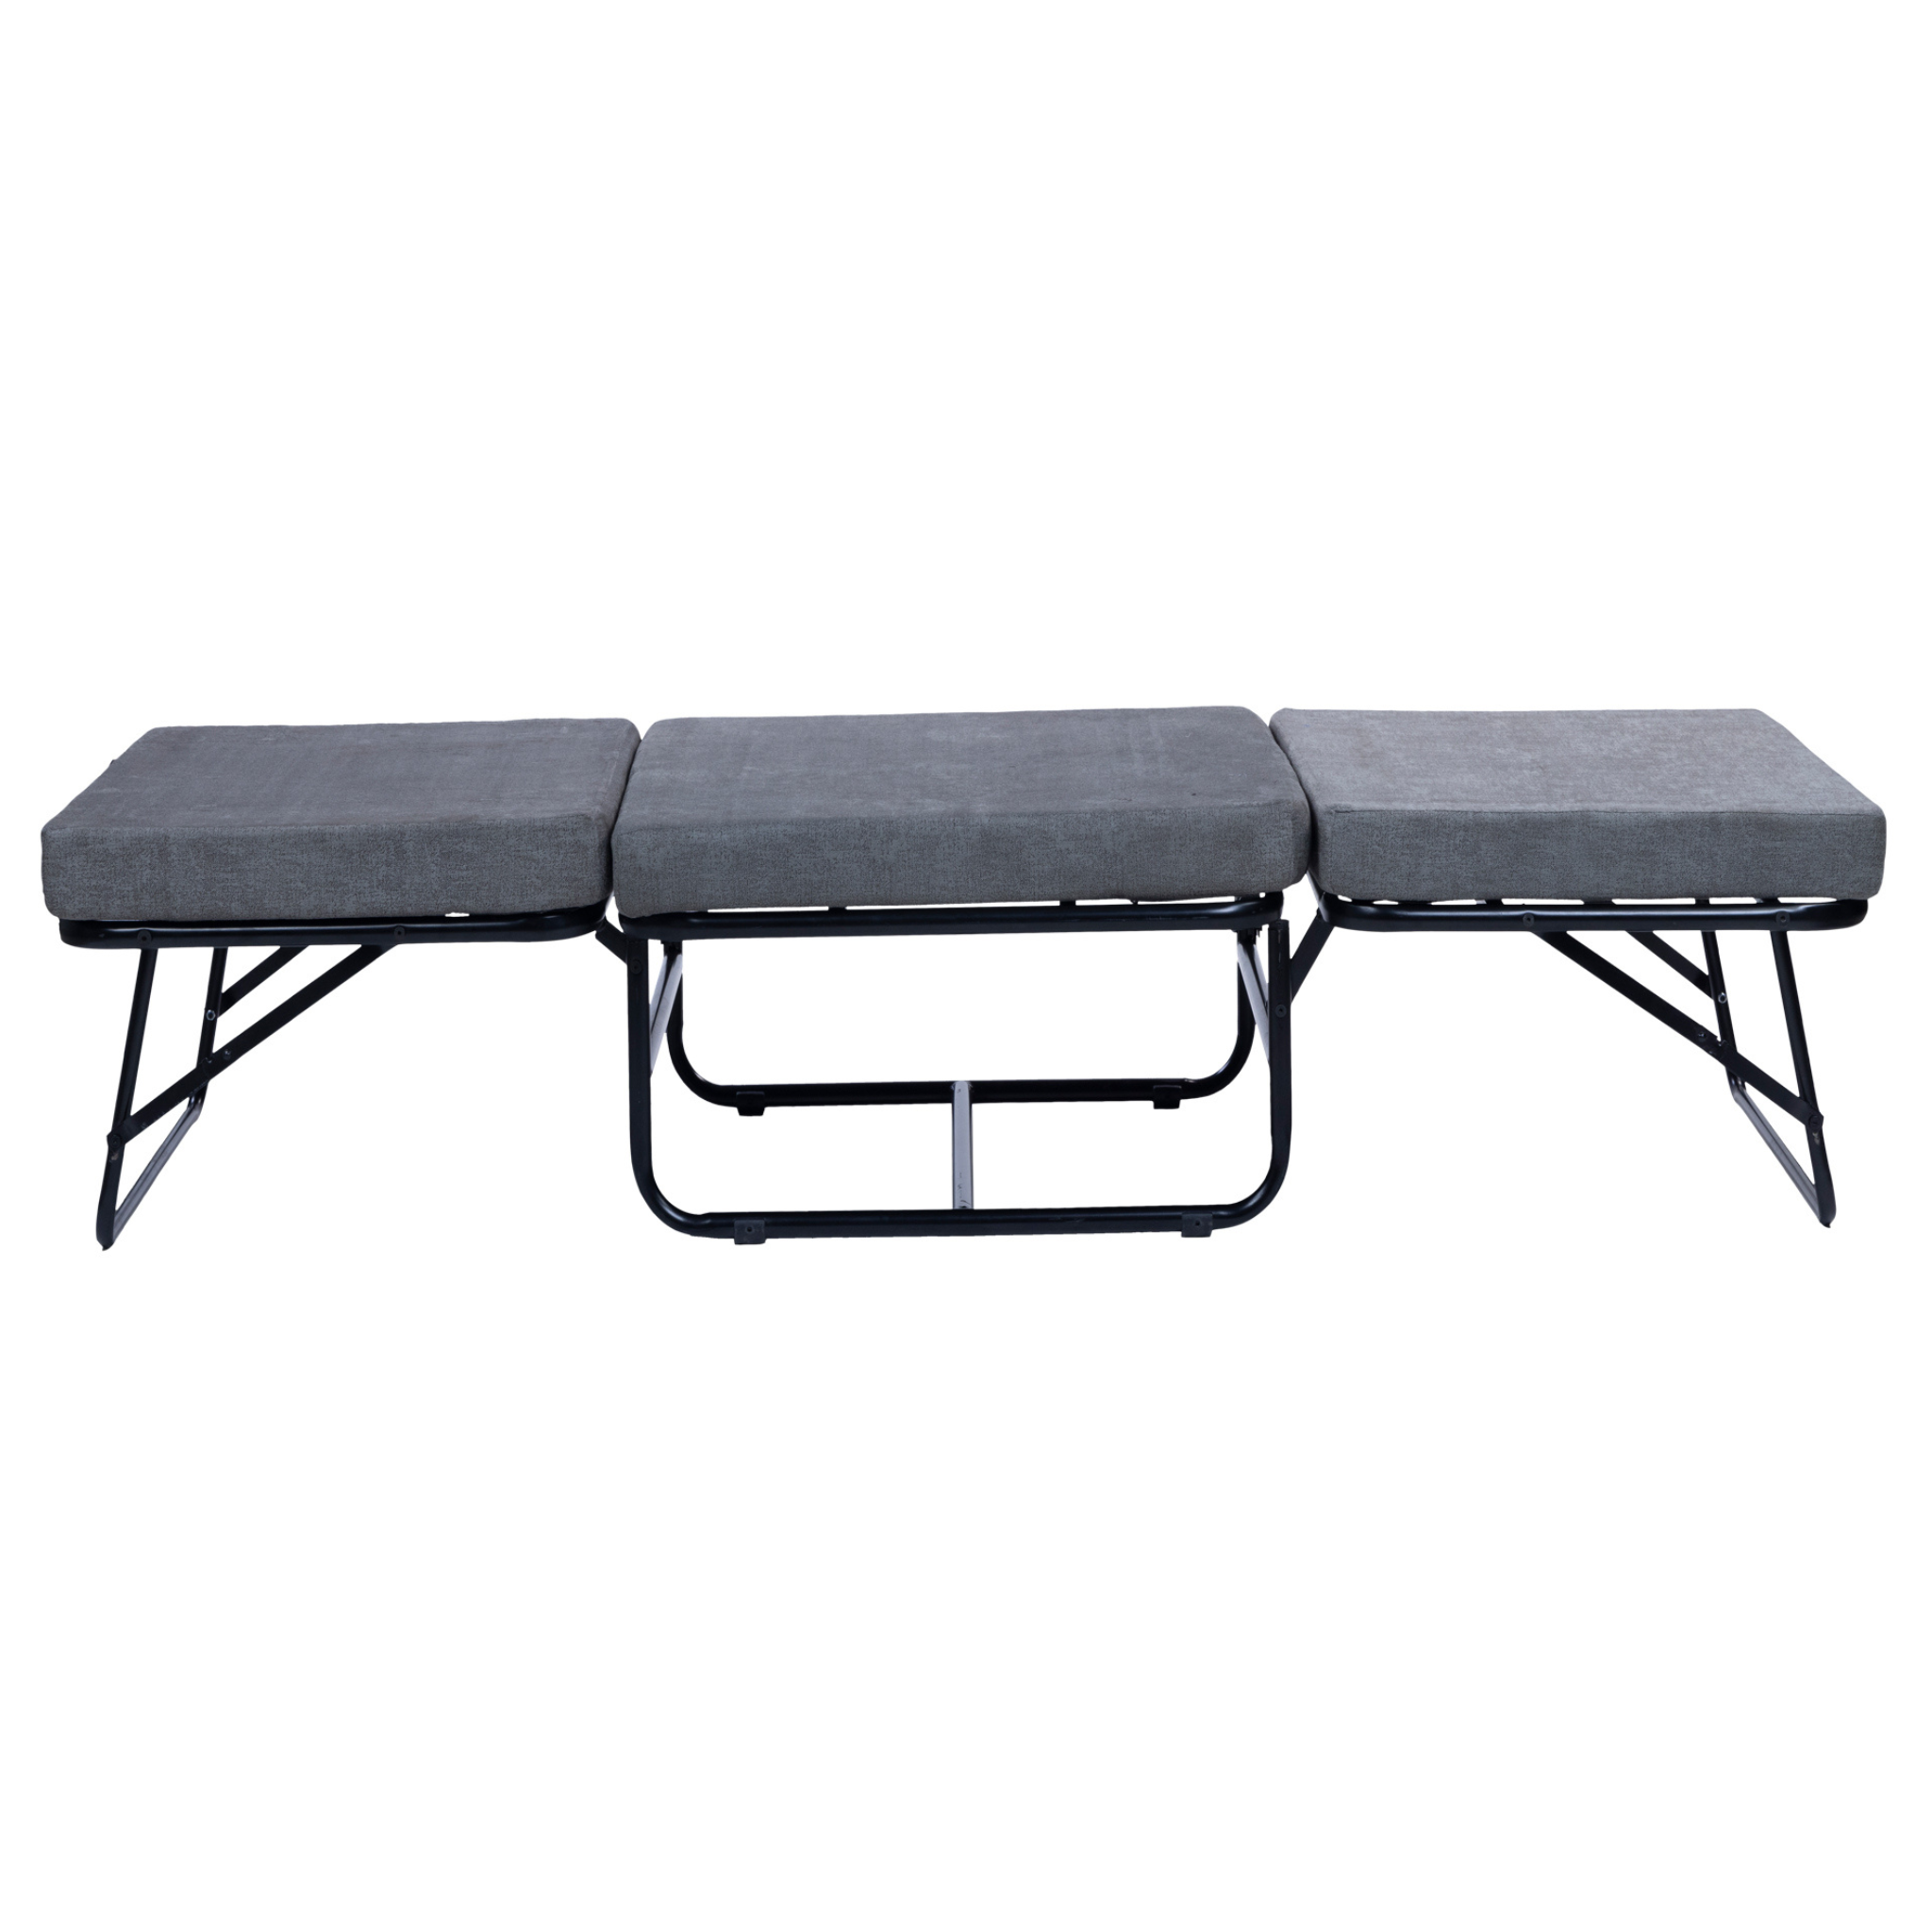 Luna Coffee Table Cum Folding Bed With Mattress